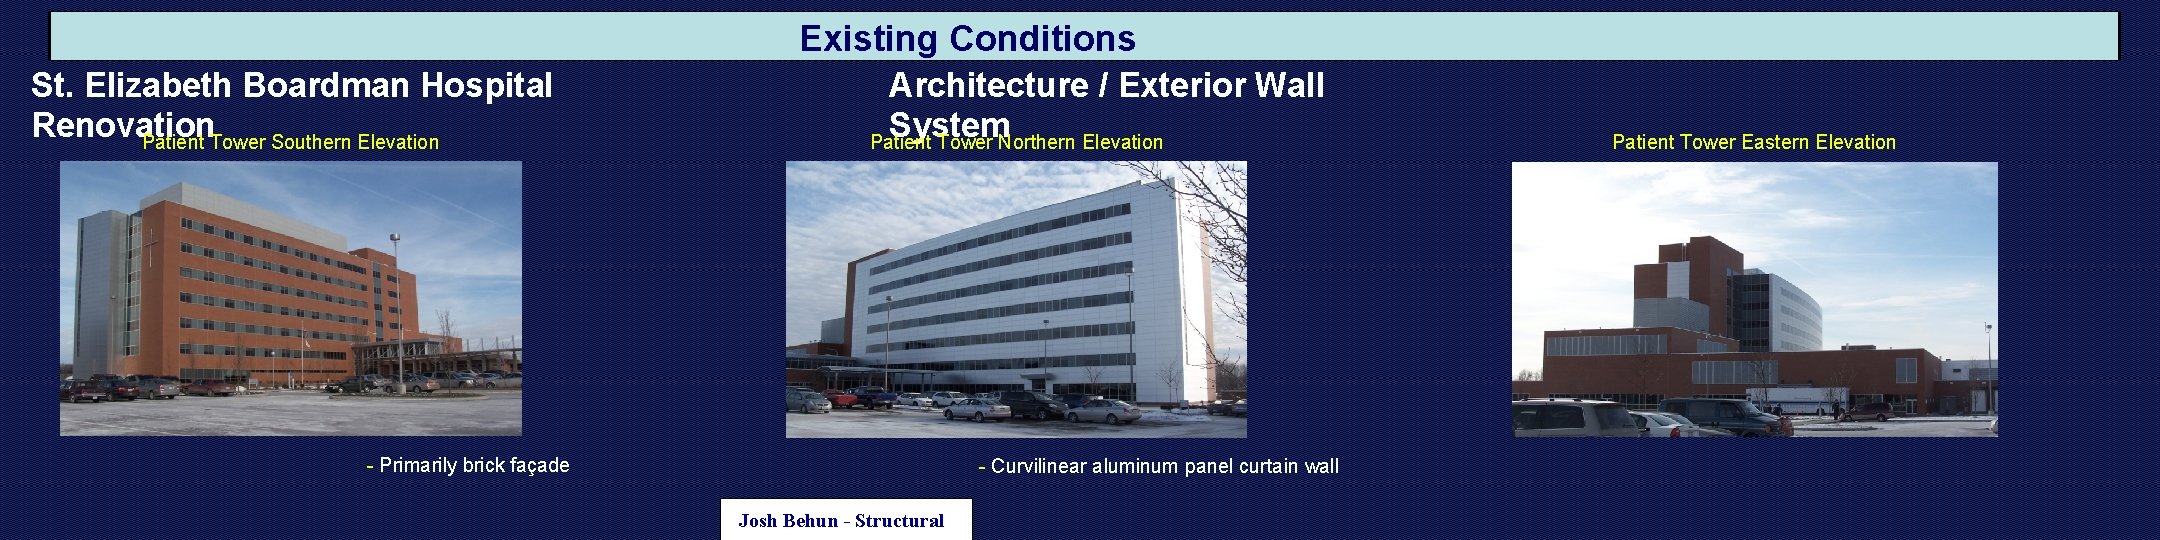 Existing Conditions St. Elizabeth Boardman Hospital Renovation Patient Tower Southern Elevation Architecture / Exterior